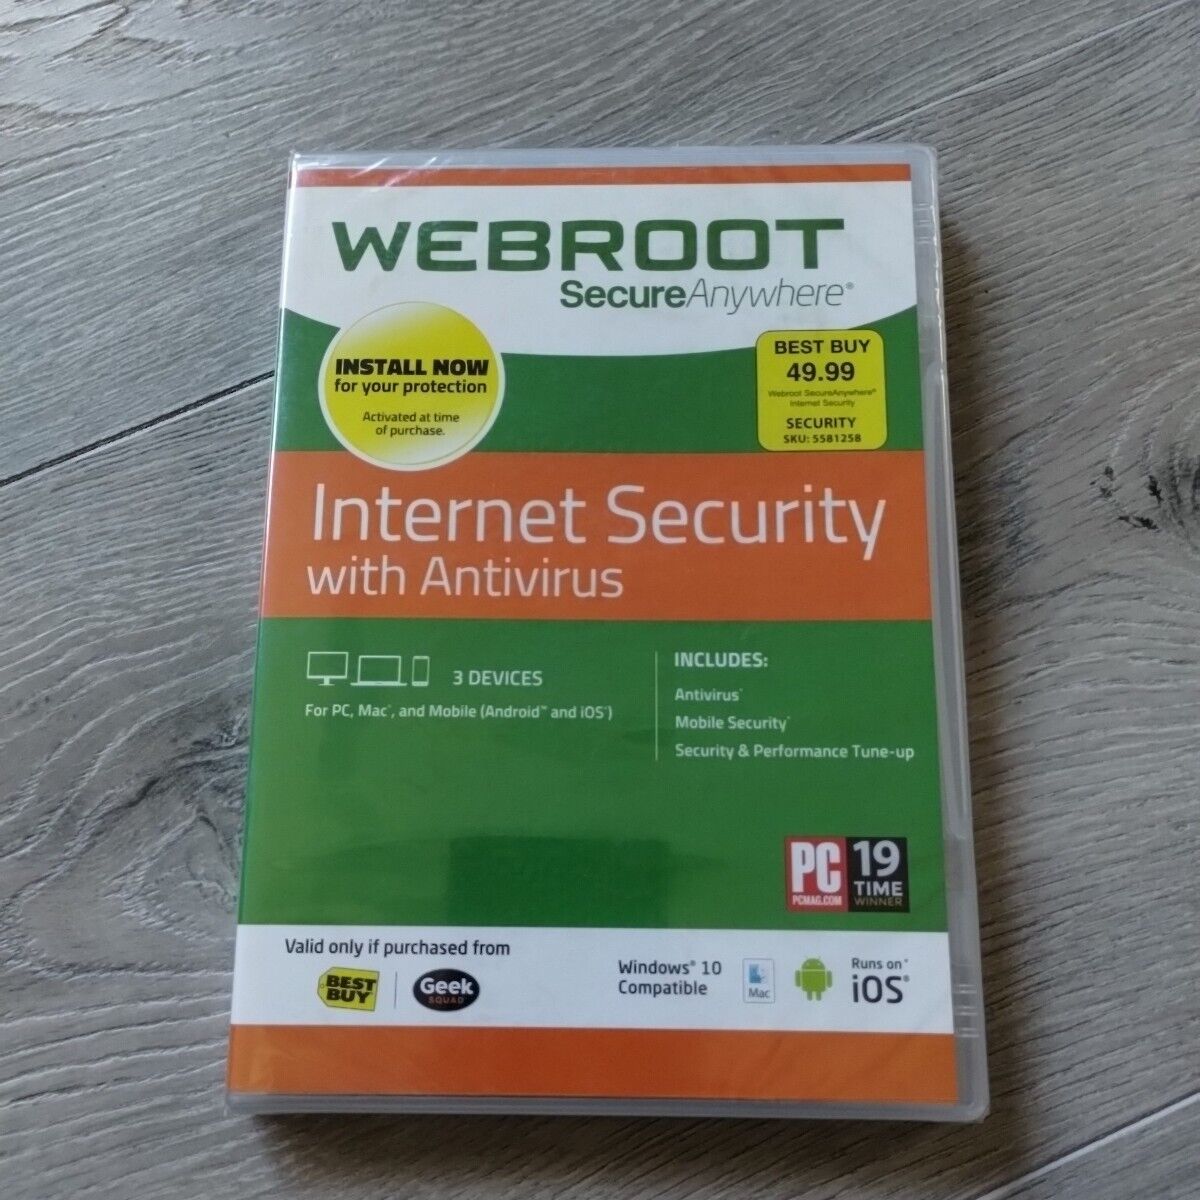 Webroot Internet Security with Antivirus [3 Devices PC, Mac, and Mobile] NEW